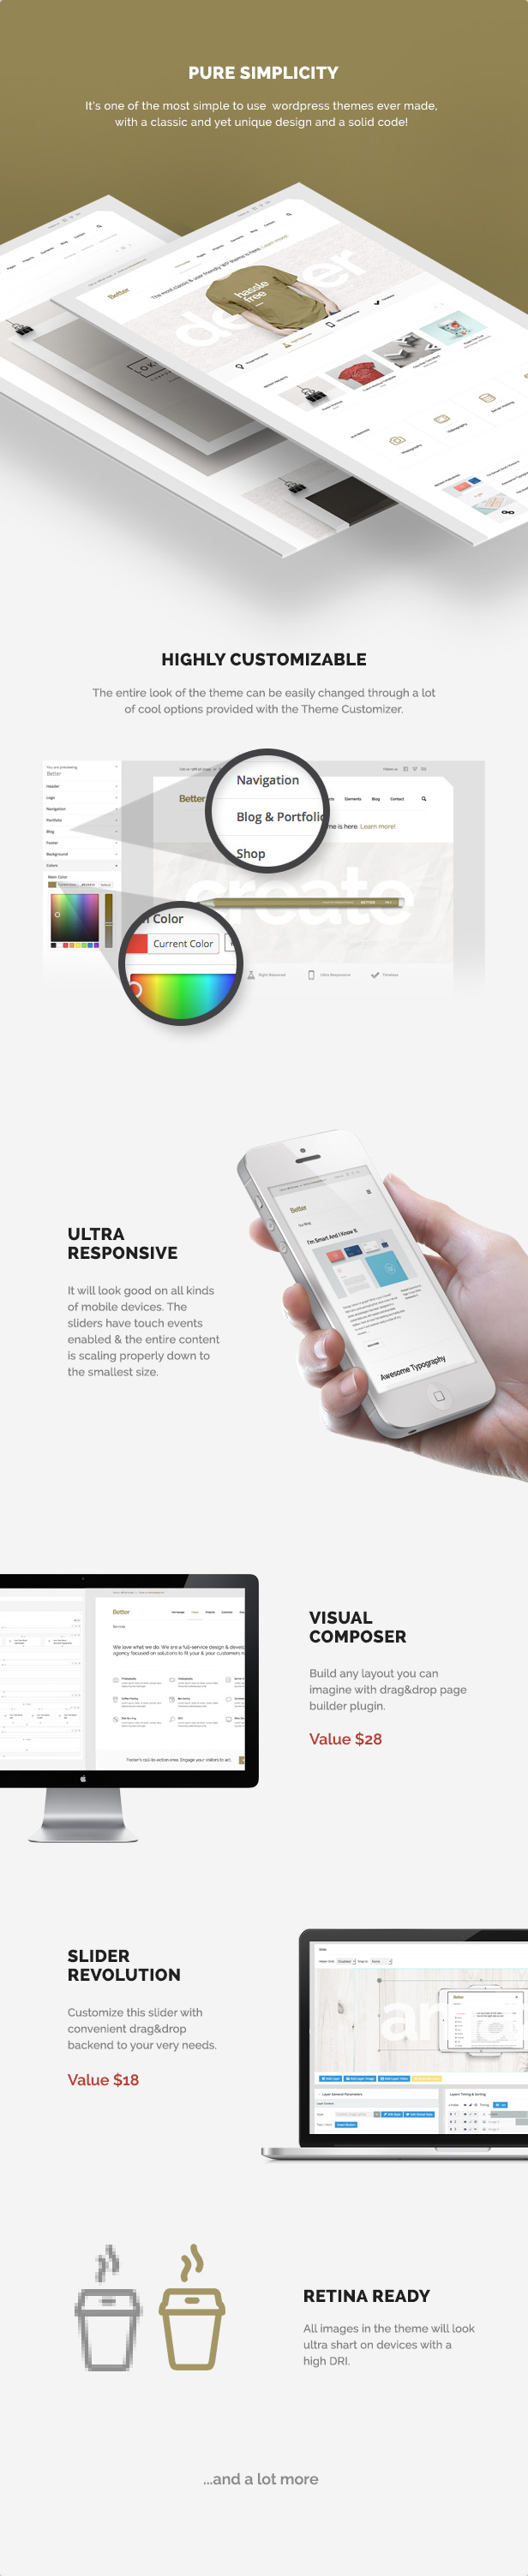 Better is a classic WordPress theme focused on minimalism at it's best